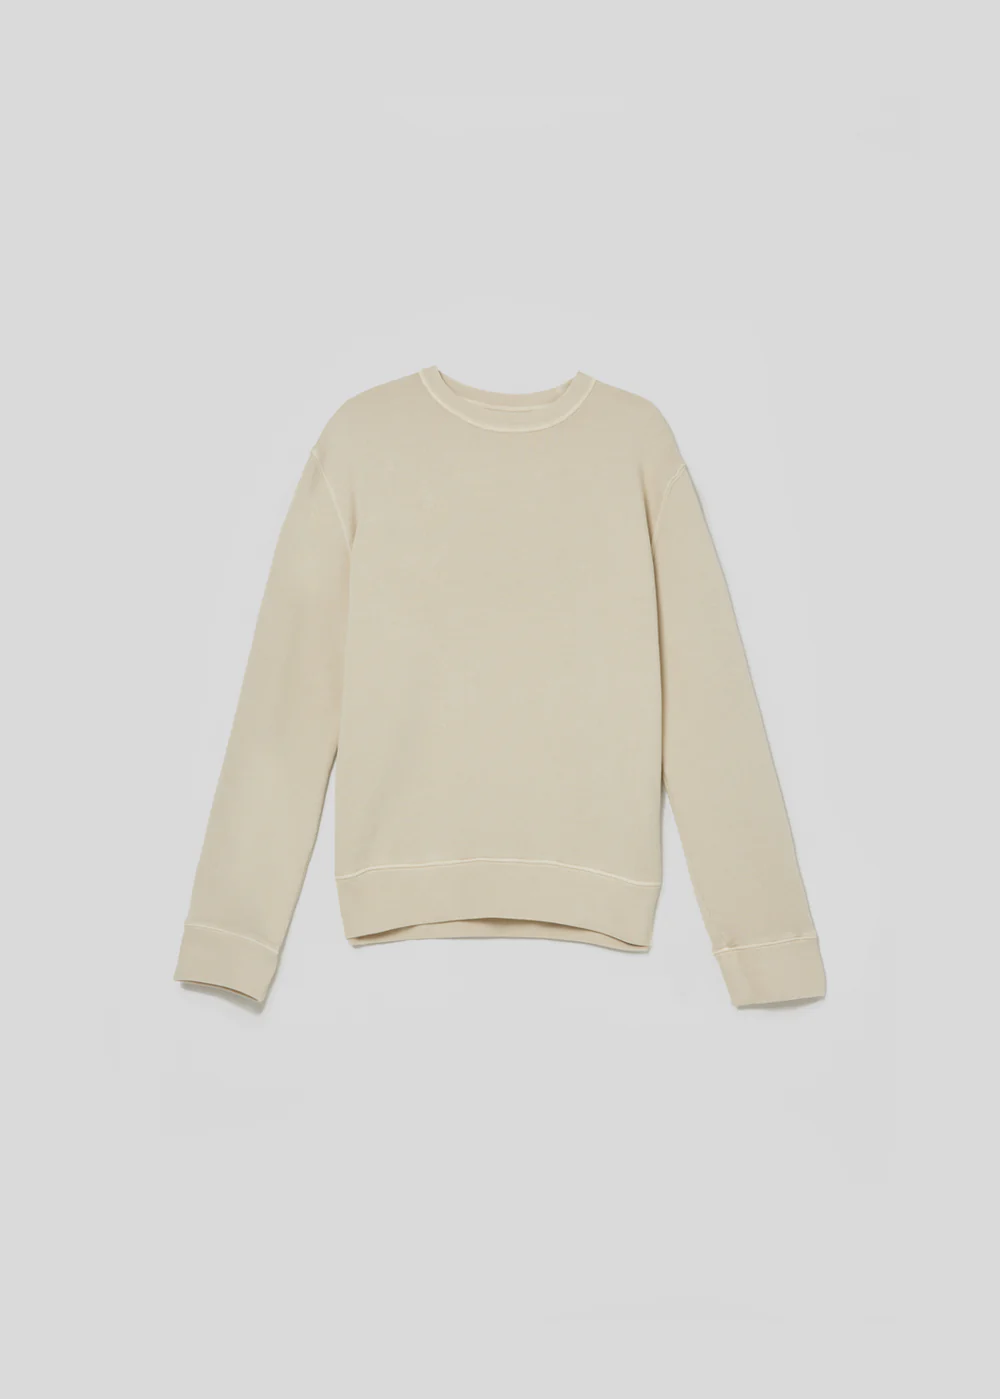 Vintage crewneck sweater from Citizens of Humanity in off-white cream color against a blank background.